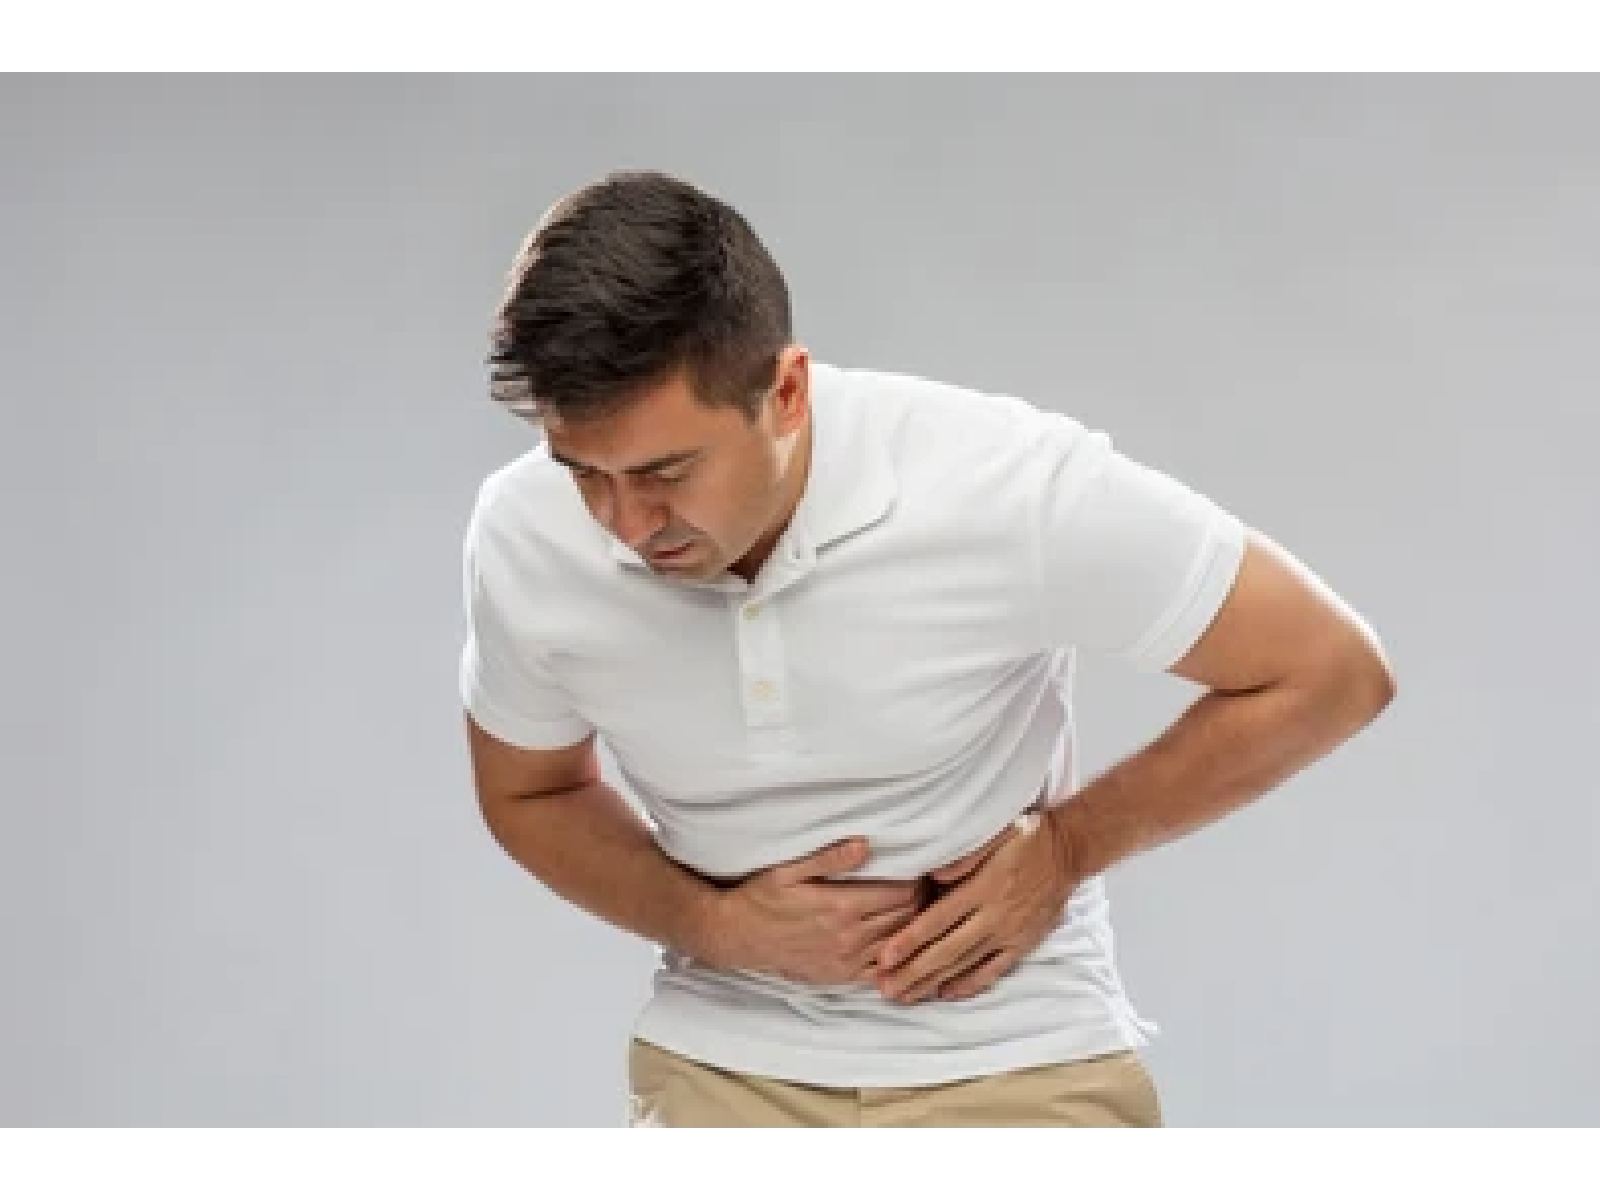 What Are Some Of The First Signs Of IBS?